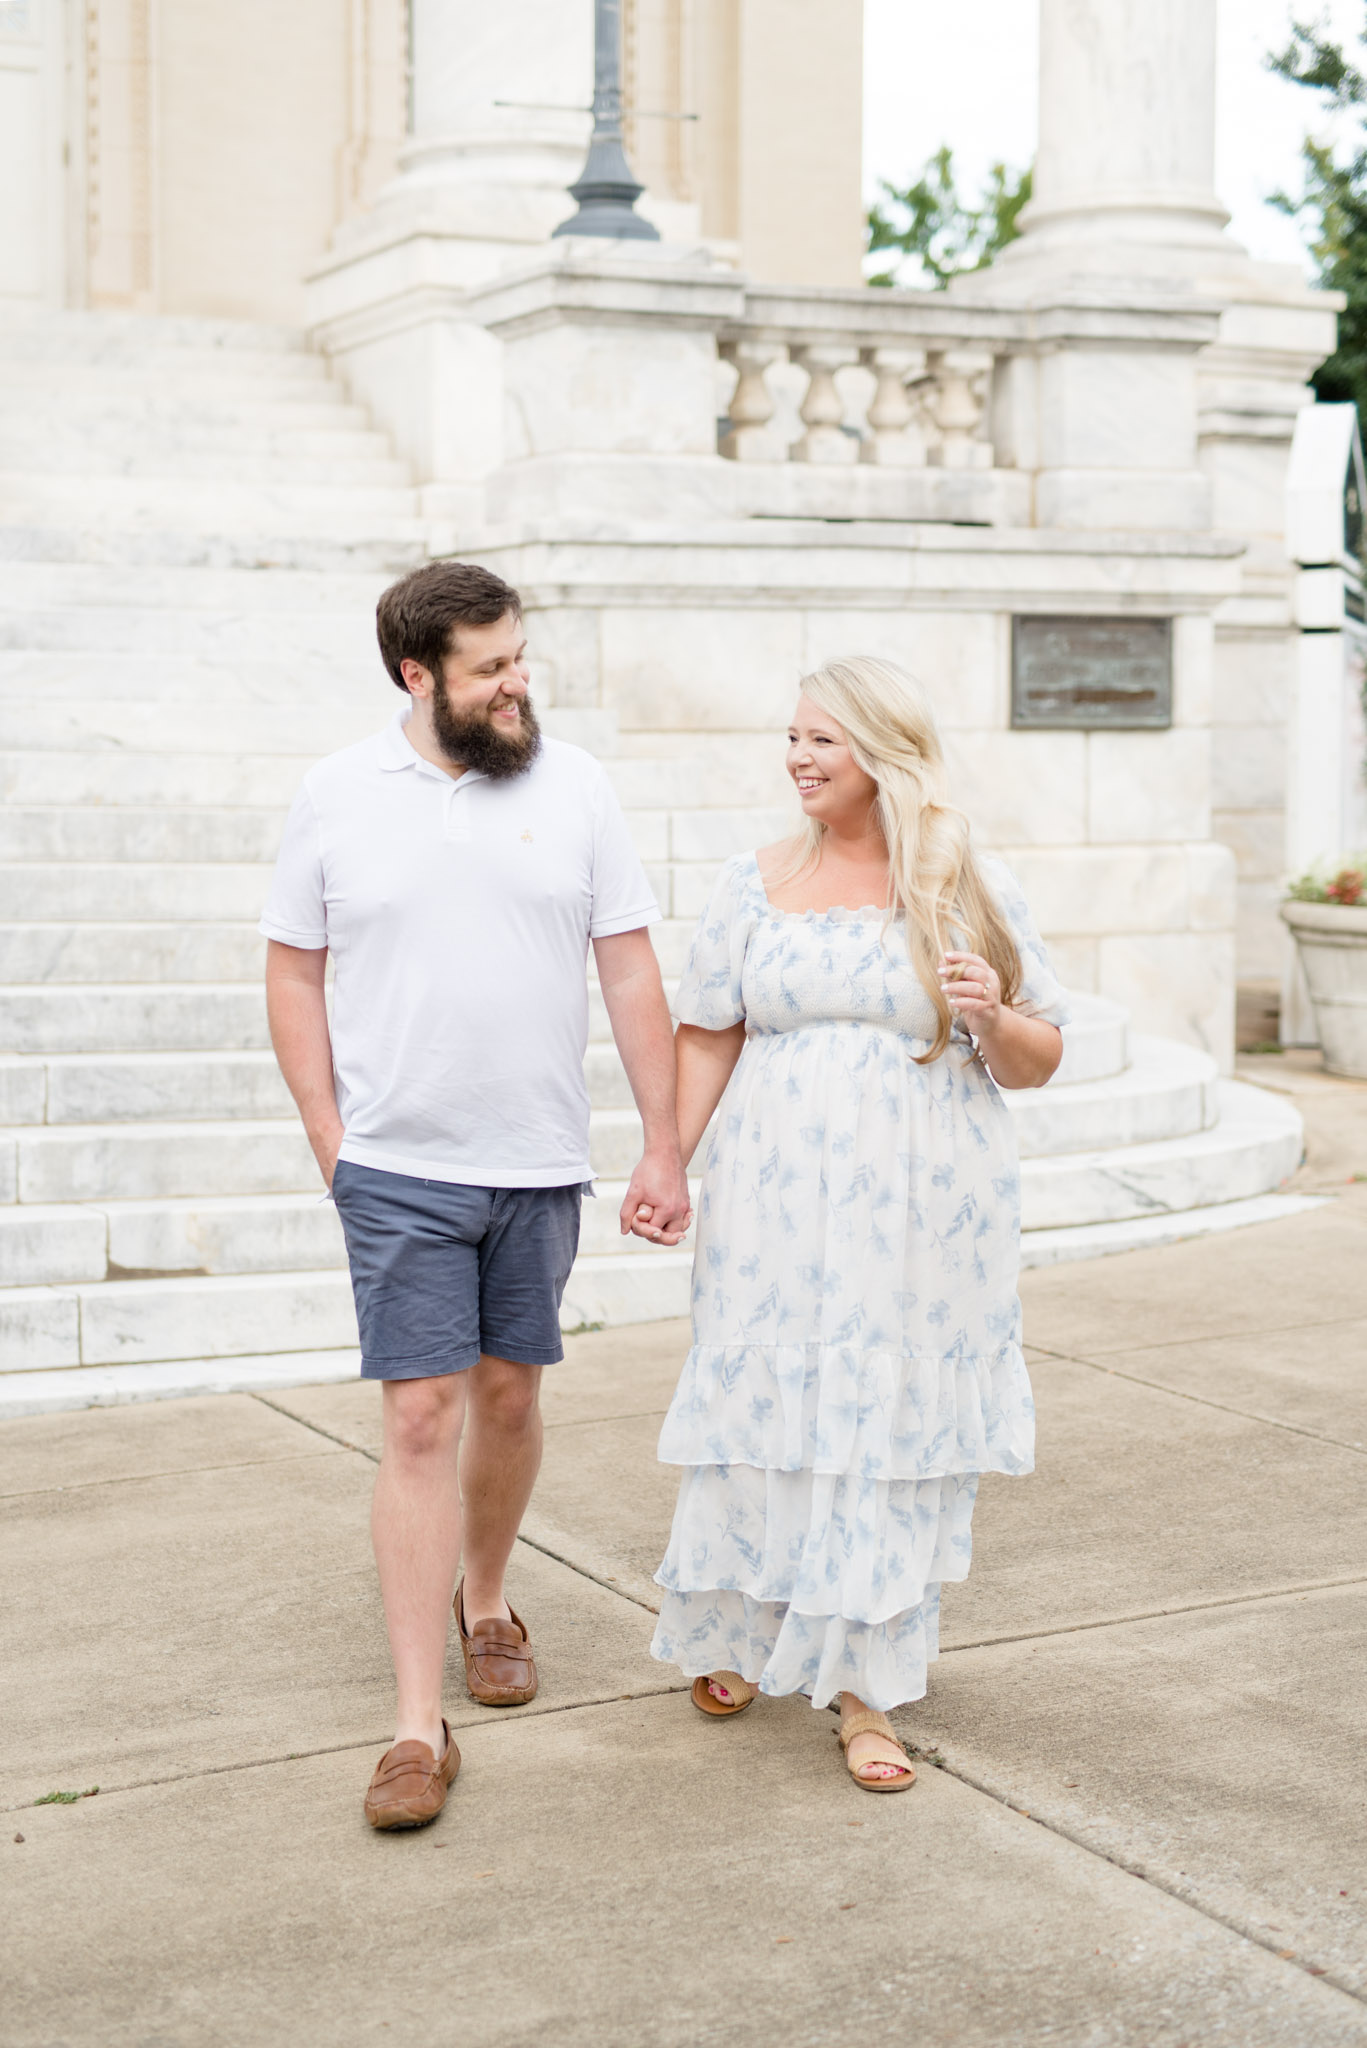 Married couple walk and laugh together.